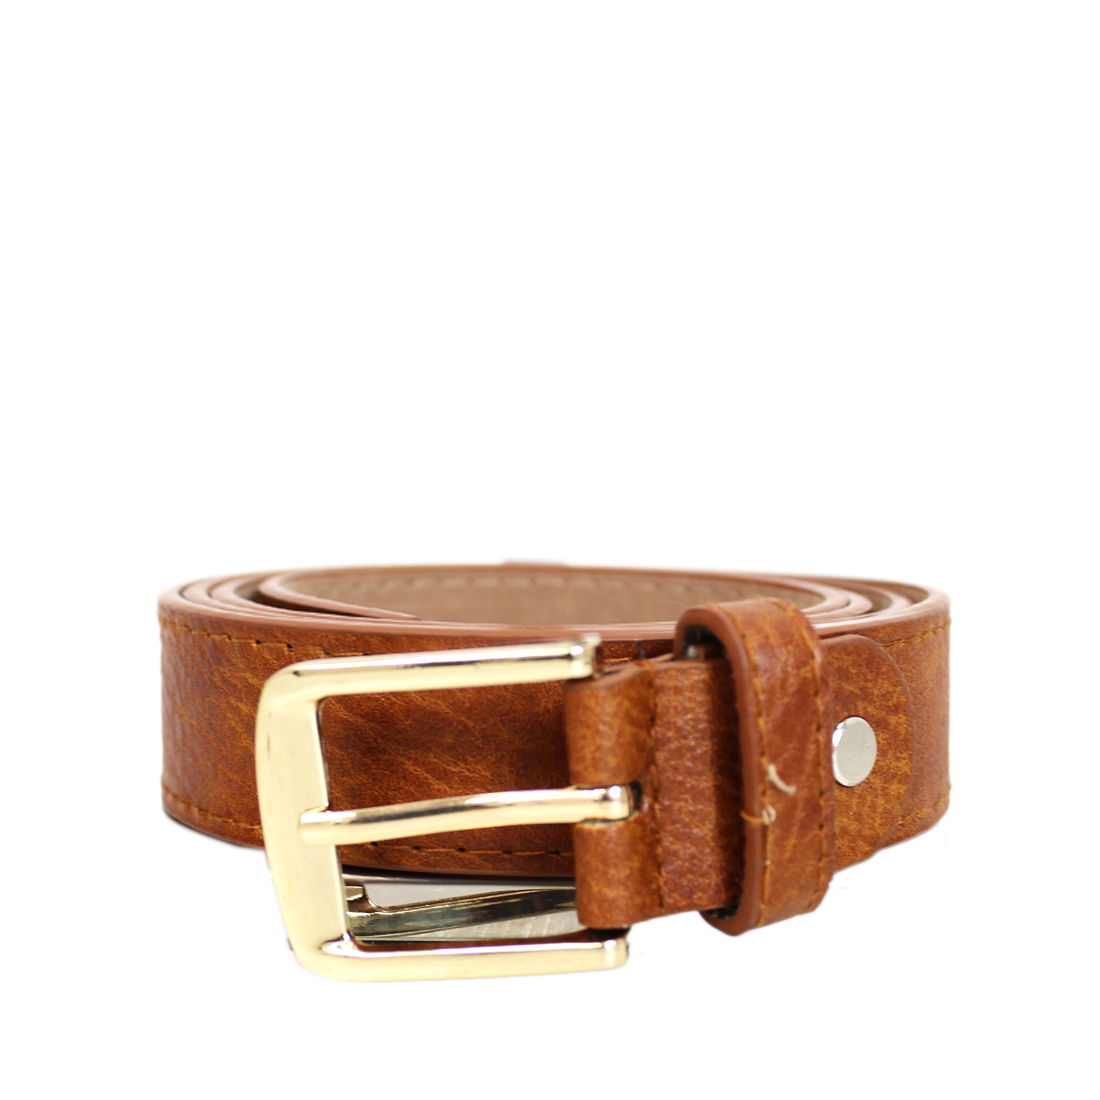 Medium wide with gold buckle